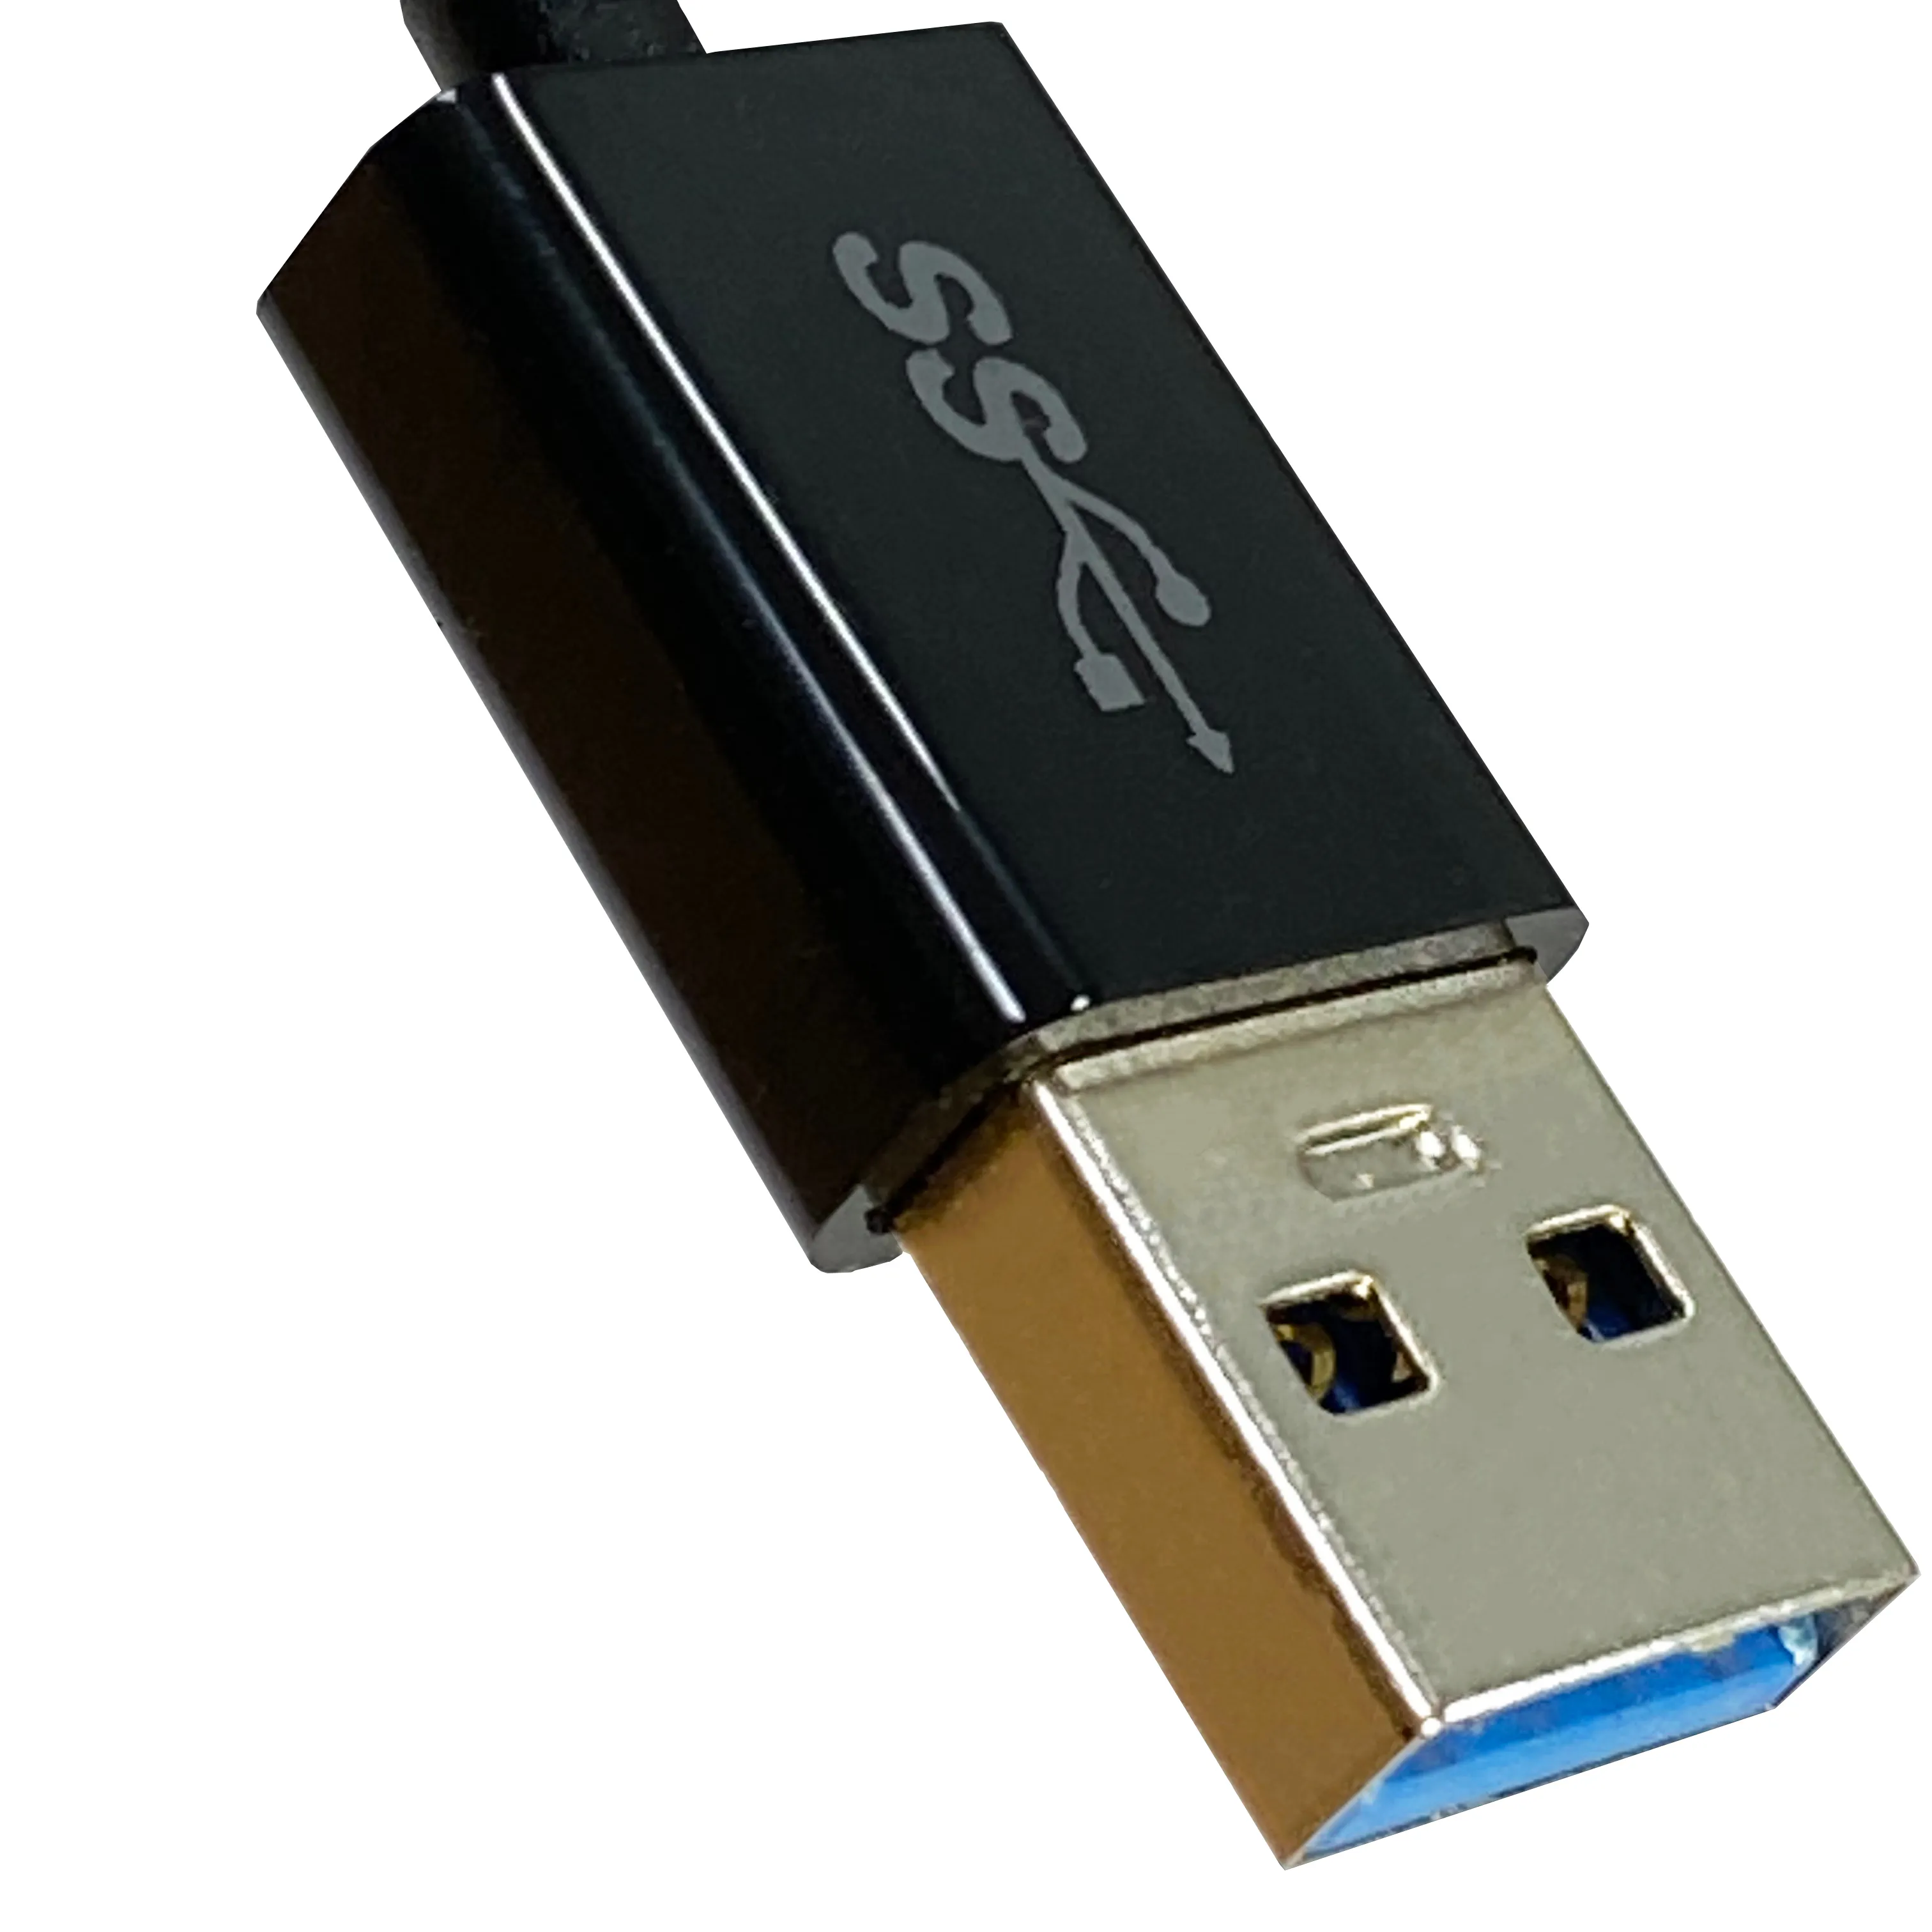 Usb 3.0 To 1000mbps Gigabit Rj45 Network Card Ethernet Adapter For Desktop And Laptop And Notebook And More Devices